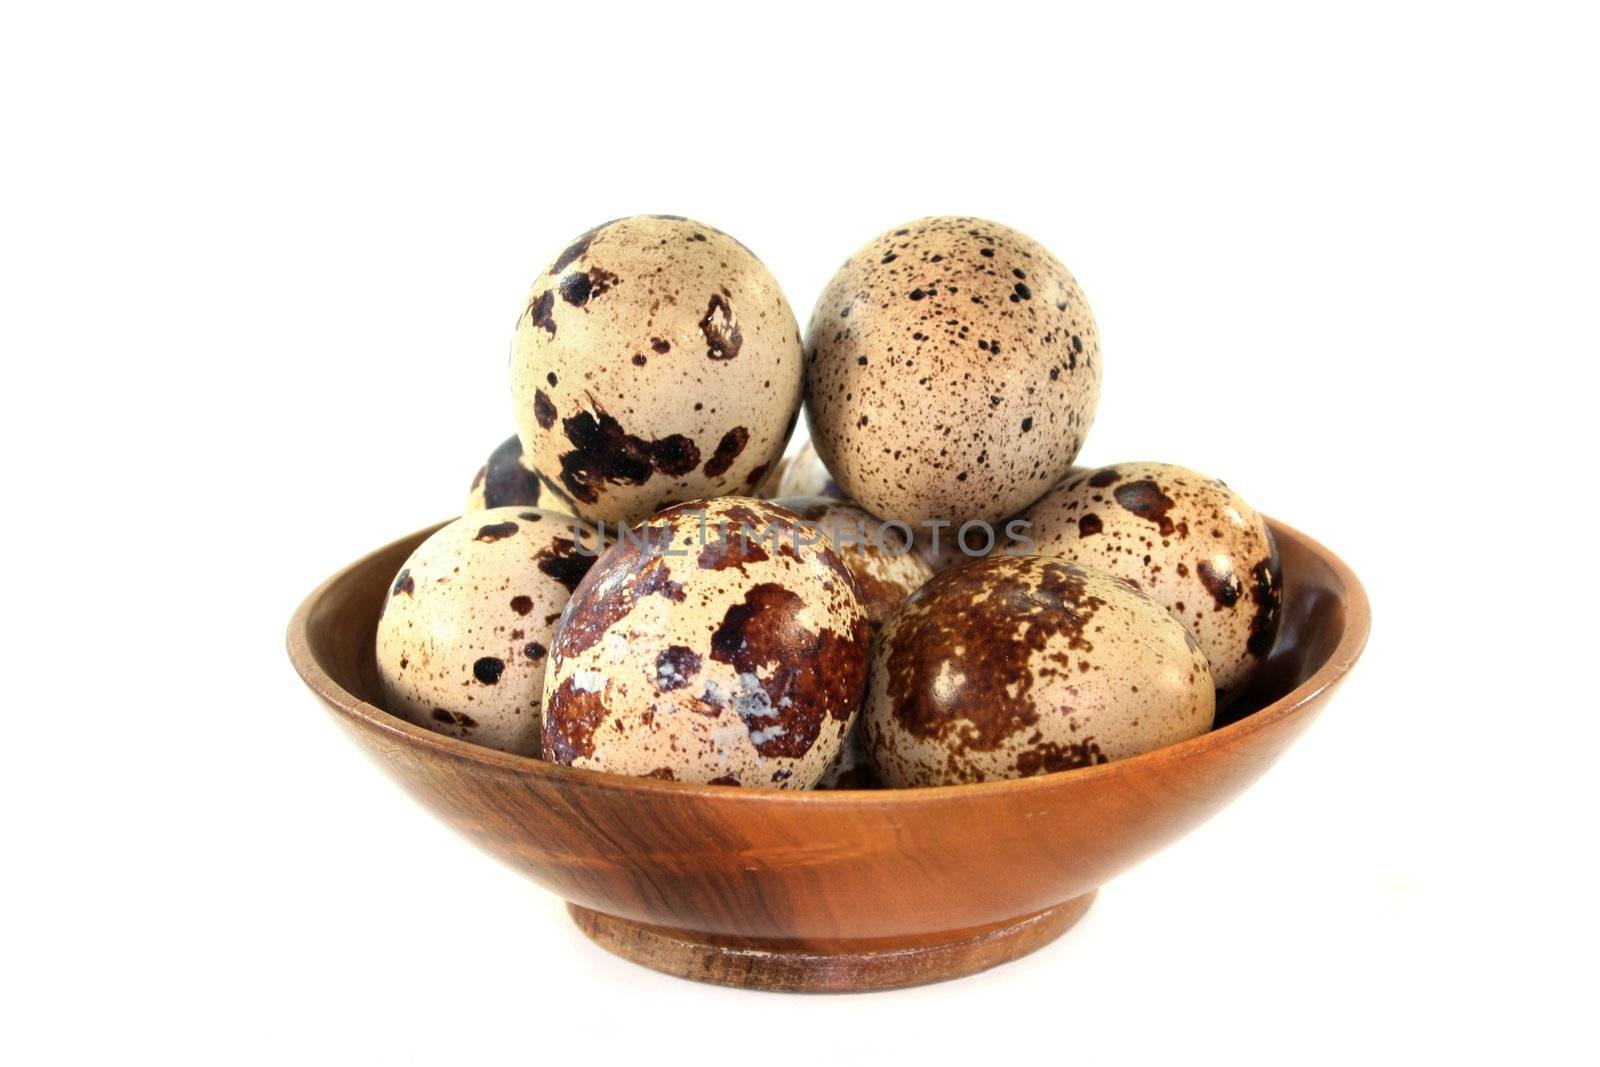 a couple of quail eggs on a white background
